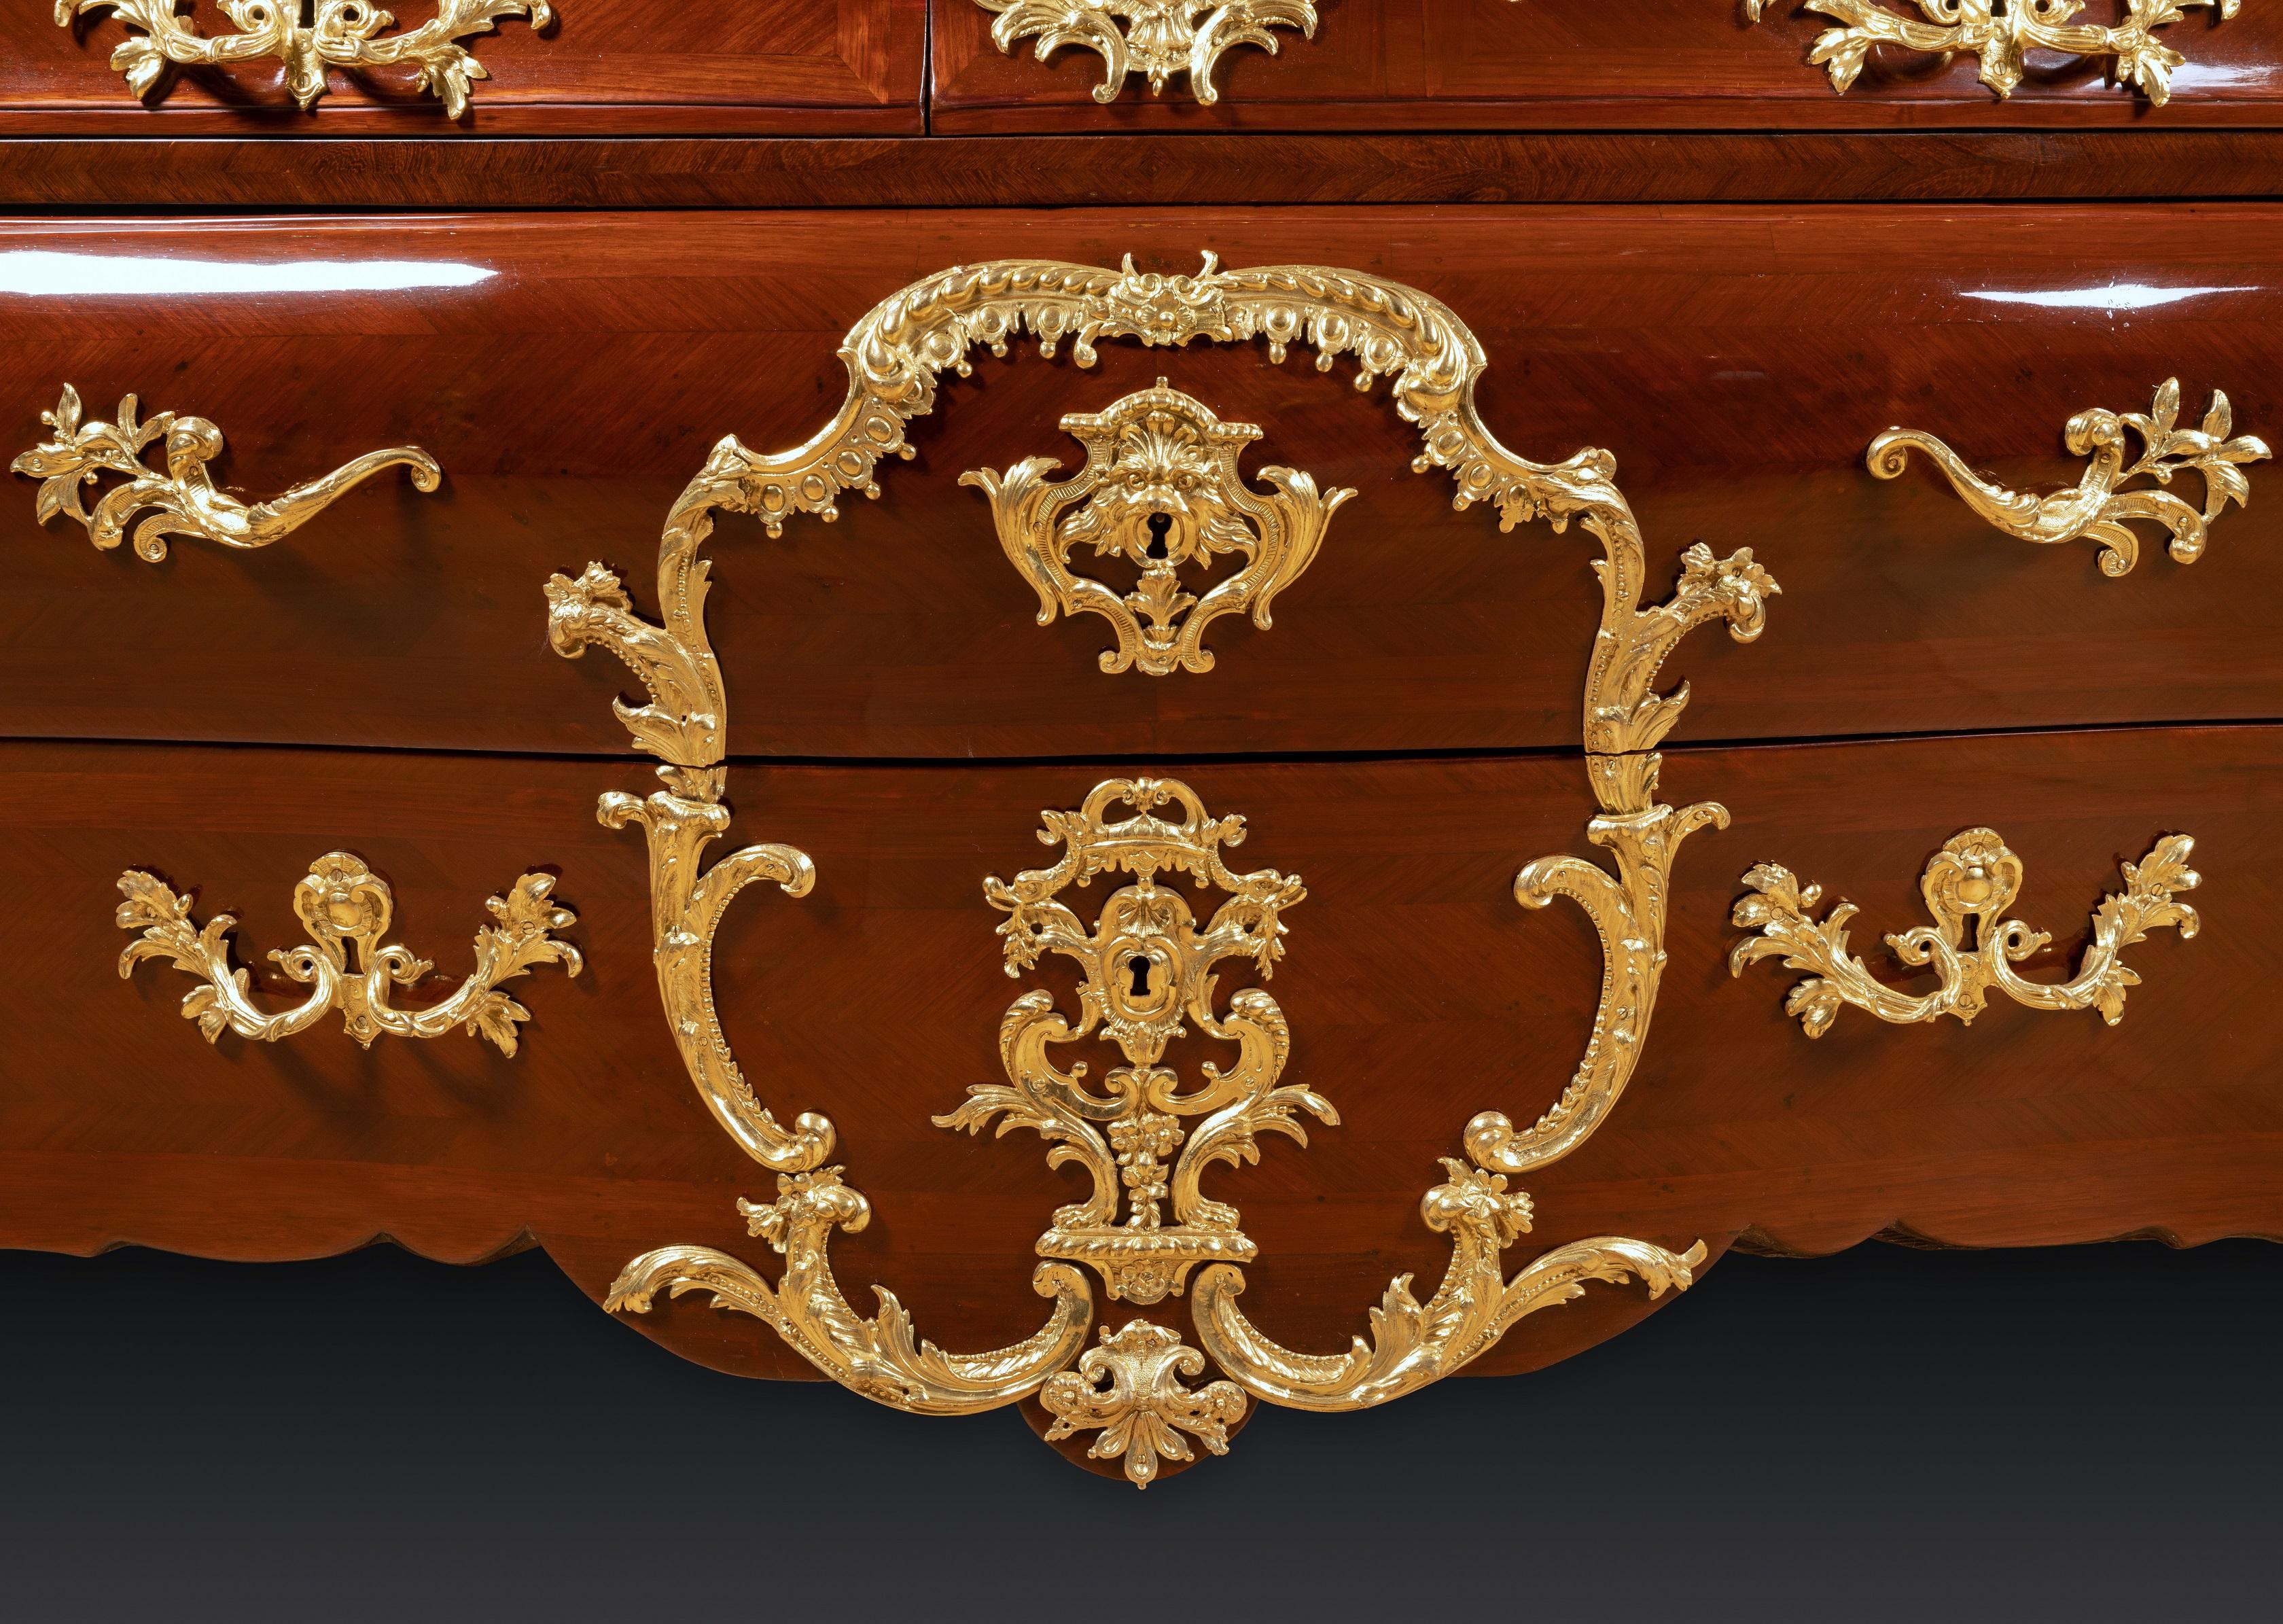 French 18th Century Regence Ormolu-Mounted Commode by Etienne Doirat For Sale 1